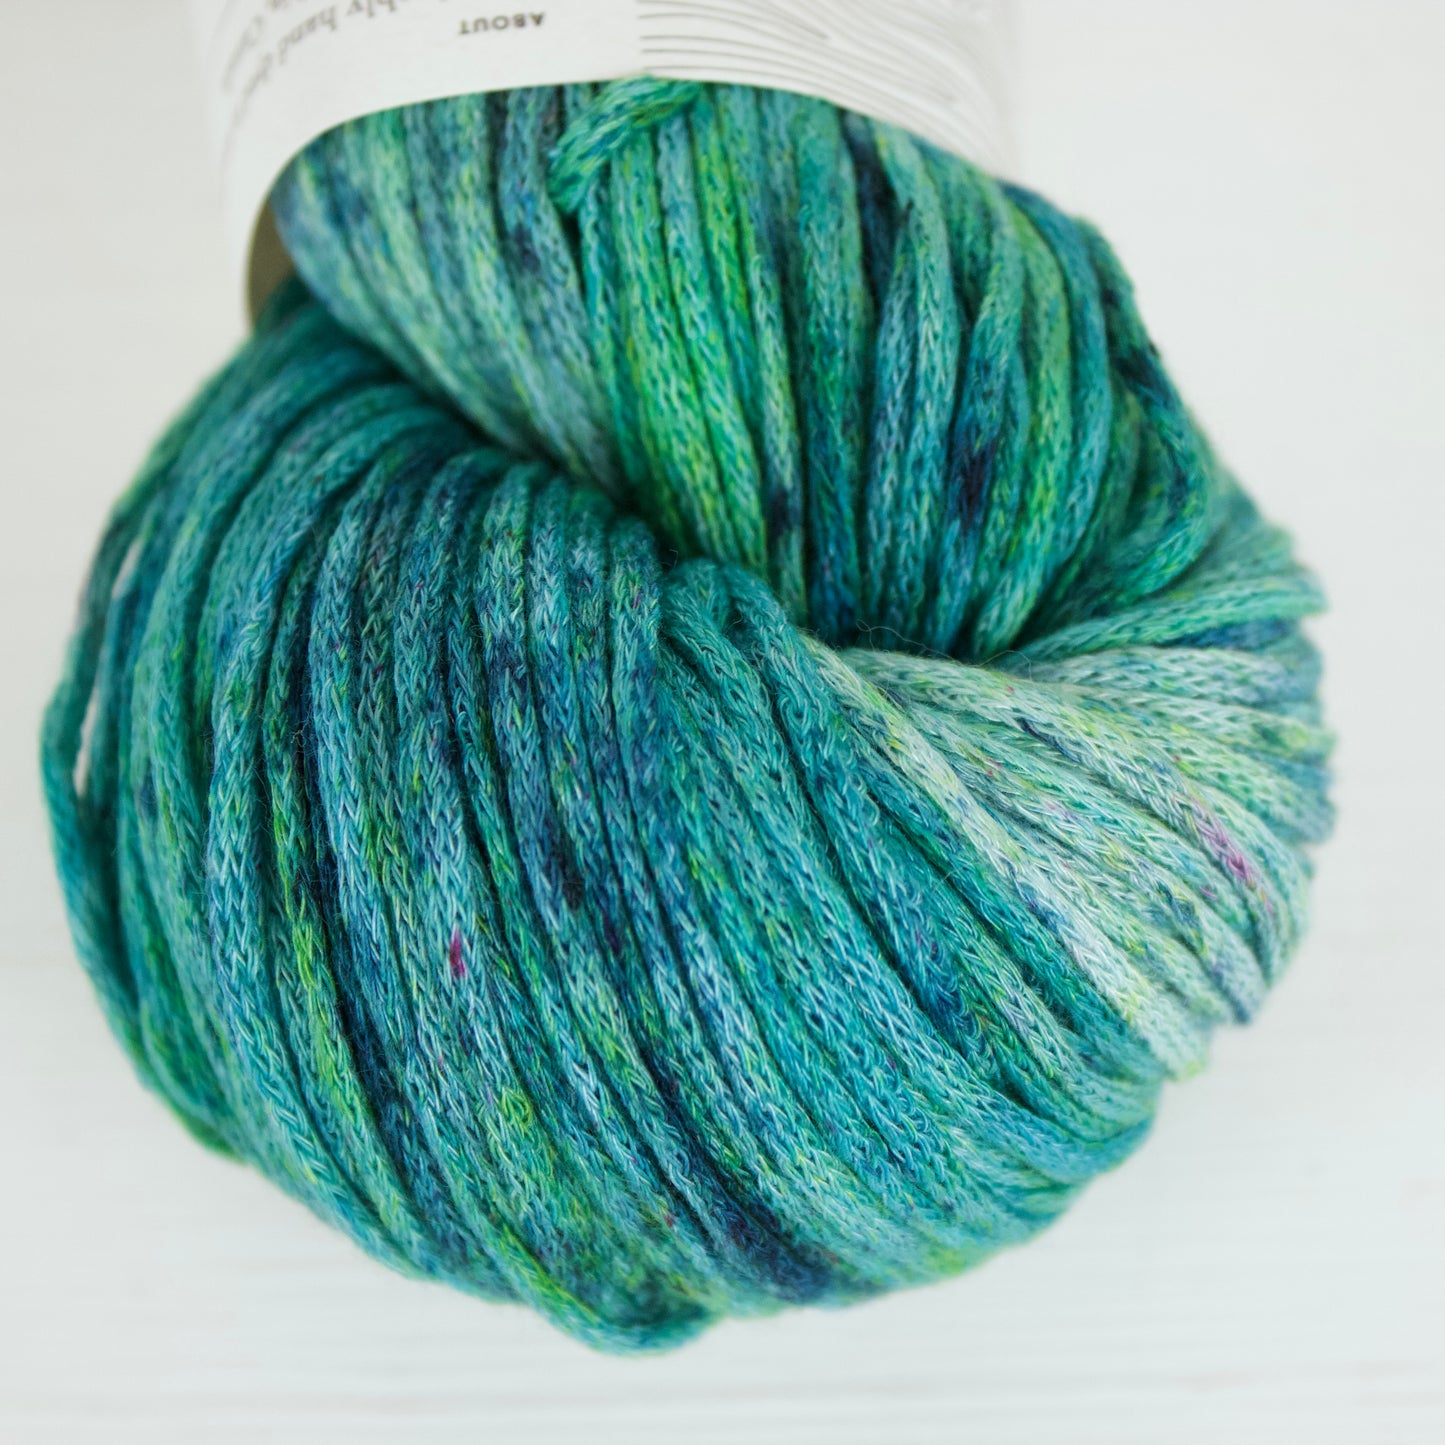 Close up of a skein of Rainy Pond colourway on Taika Aran. It's a speckled yarn with lots of speckles, so the yarn is saturated with grassy greens, indigo, sky blue, aqua, royal blue, and the occasional magenta fleck. 